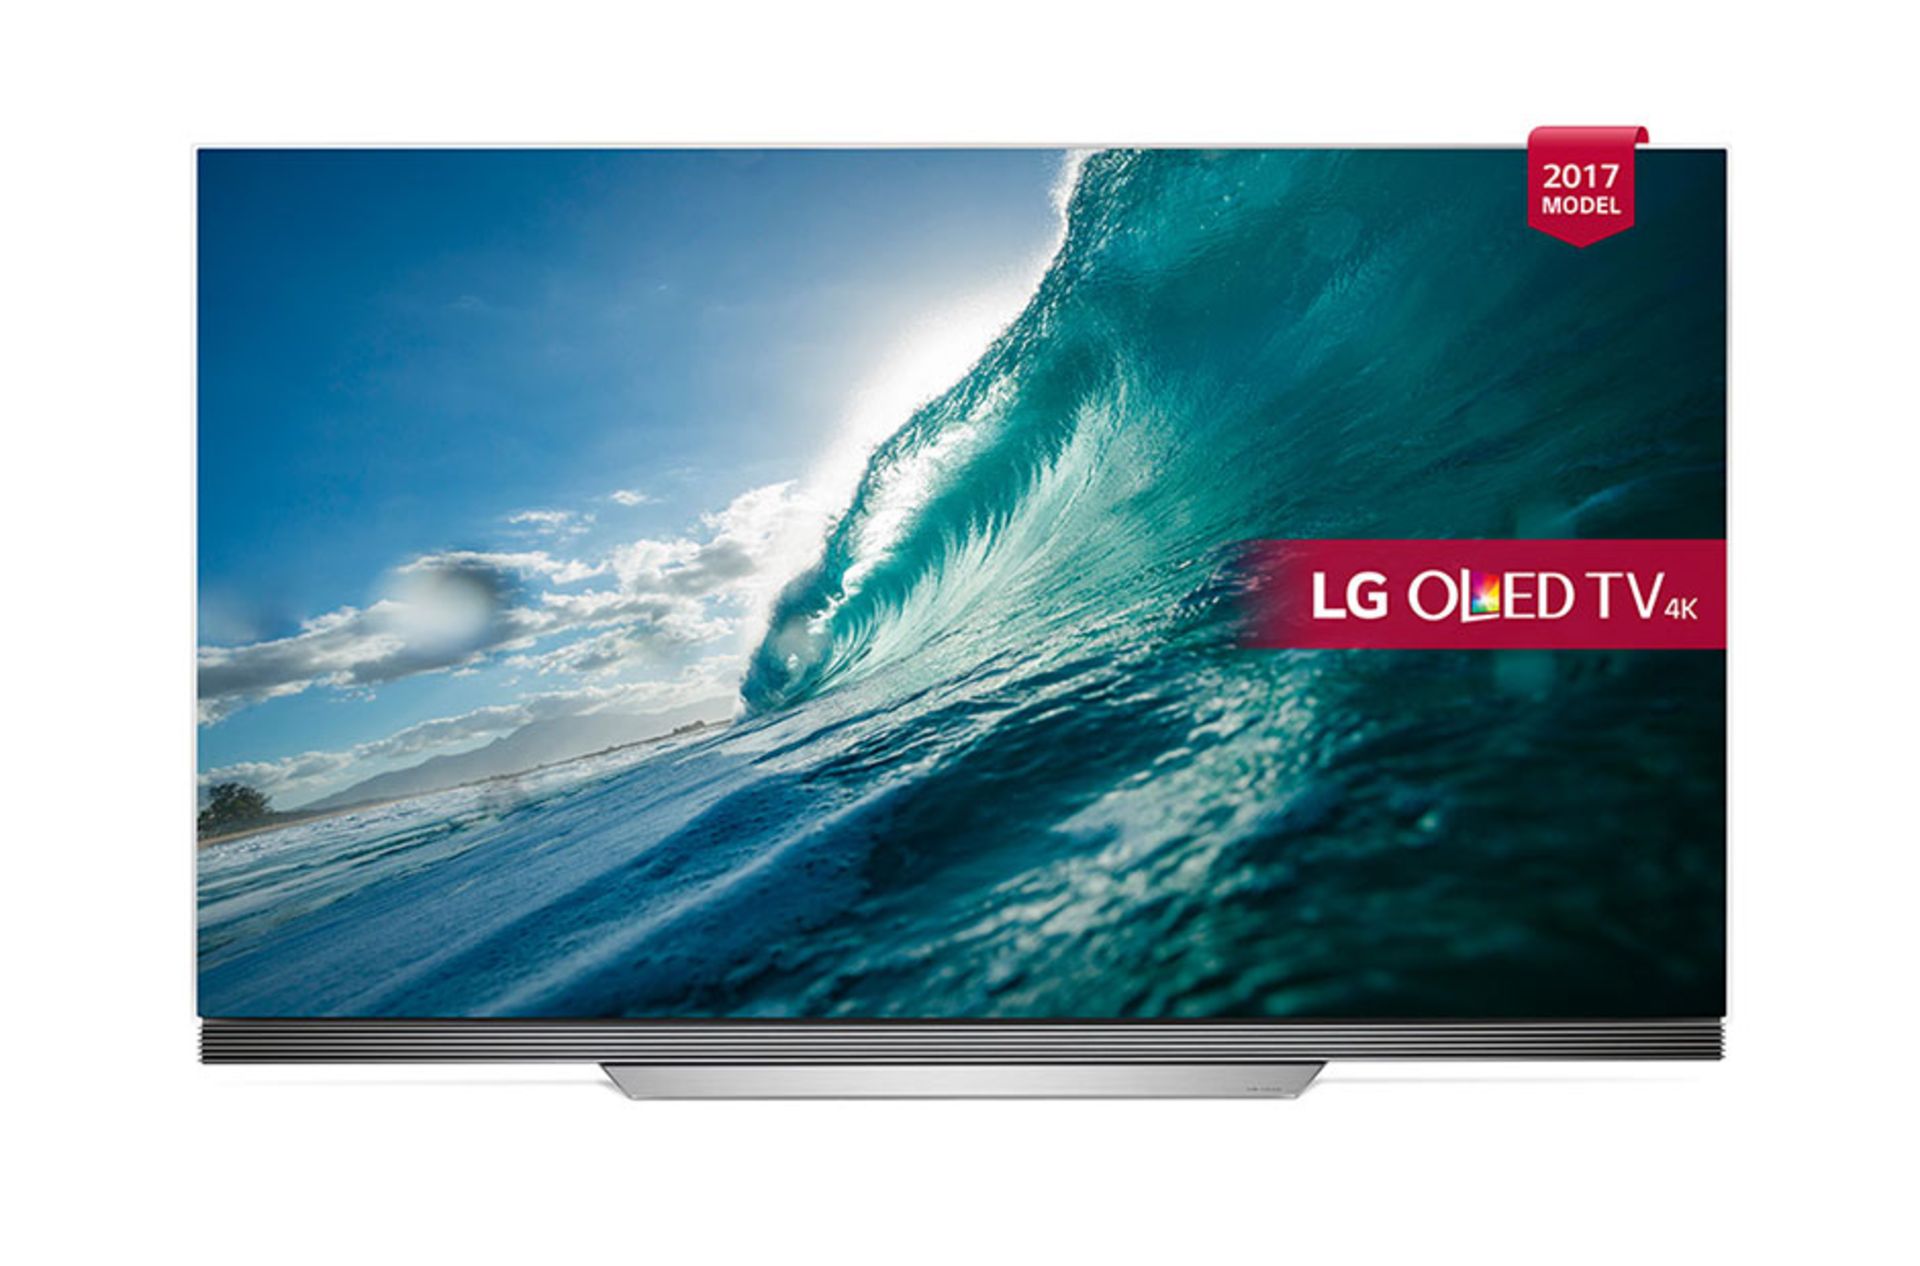 V Grade A LG 65 Inch OLED HDR 4K UHD SMART TV WITH FREEVIEW HD, WEBOS 3.5, WIFI - ULTRA SLIM - BUILT